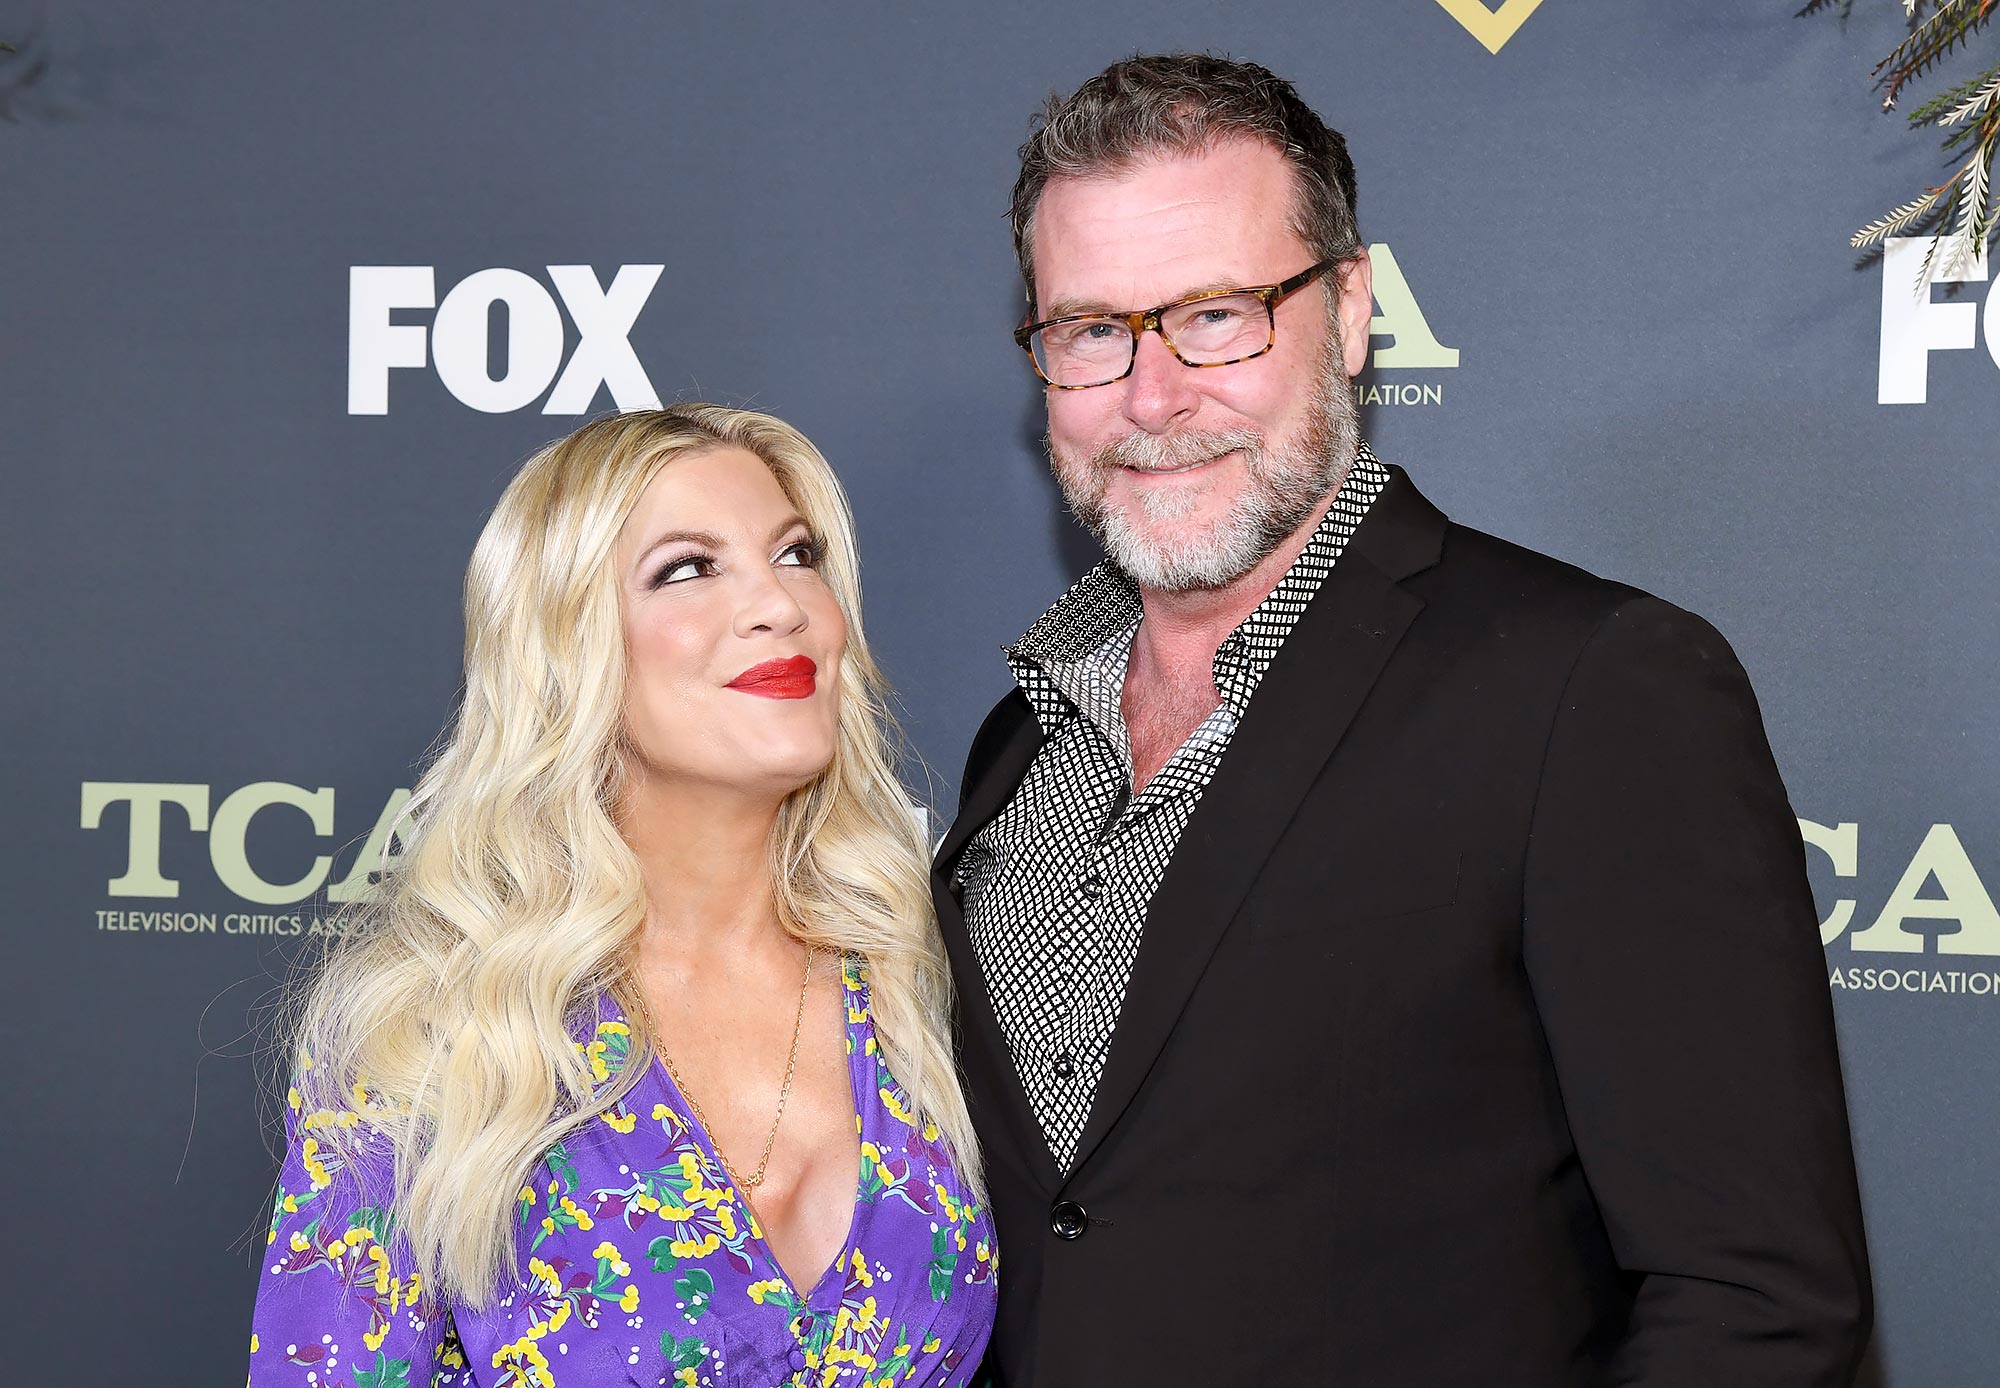 Tori Spelling Says Jennie Garth and Dean McDermott ‘Haven’t Always Gotten Along’ Over the Years